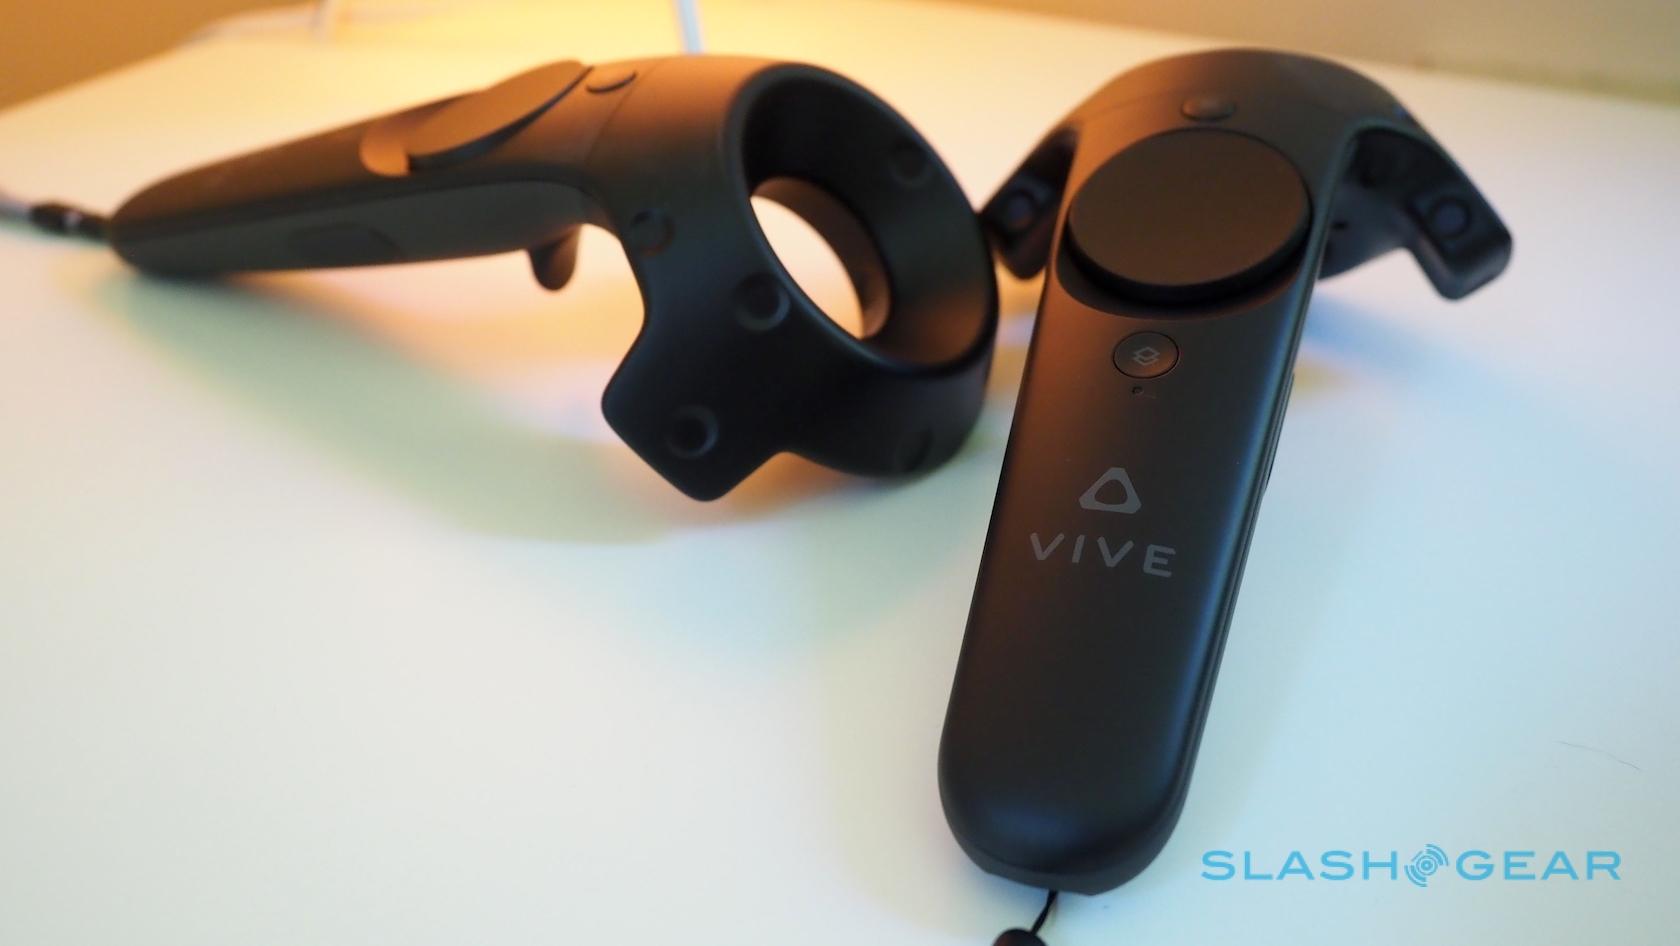 htc vive controller review